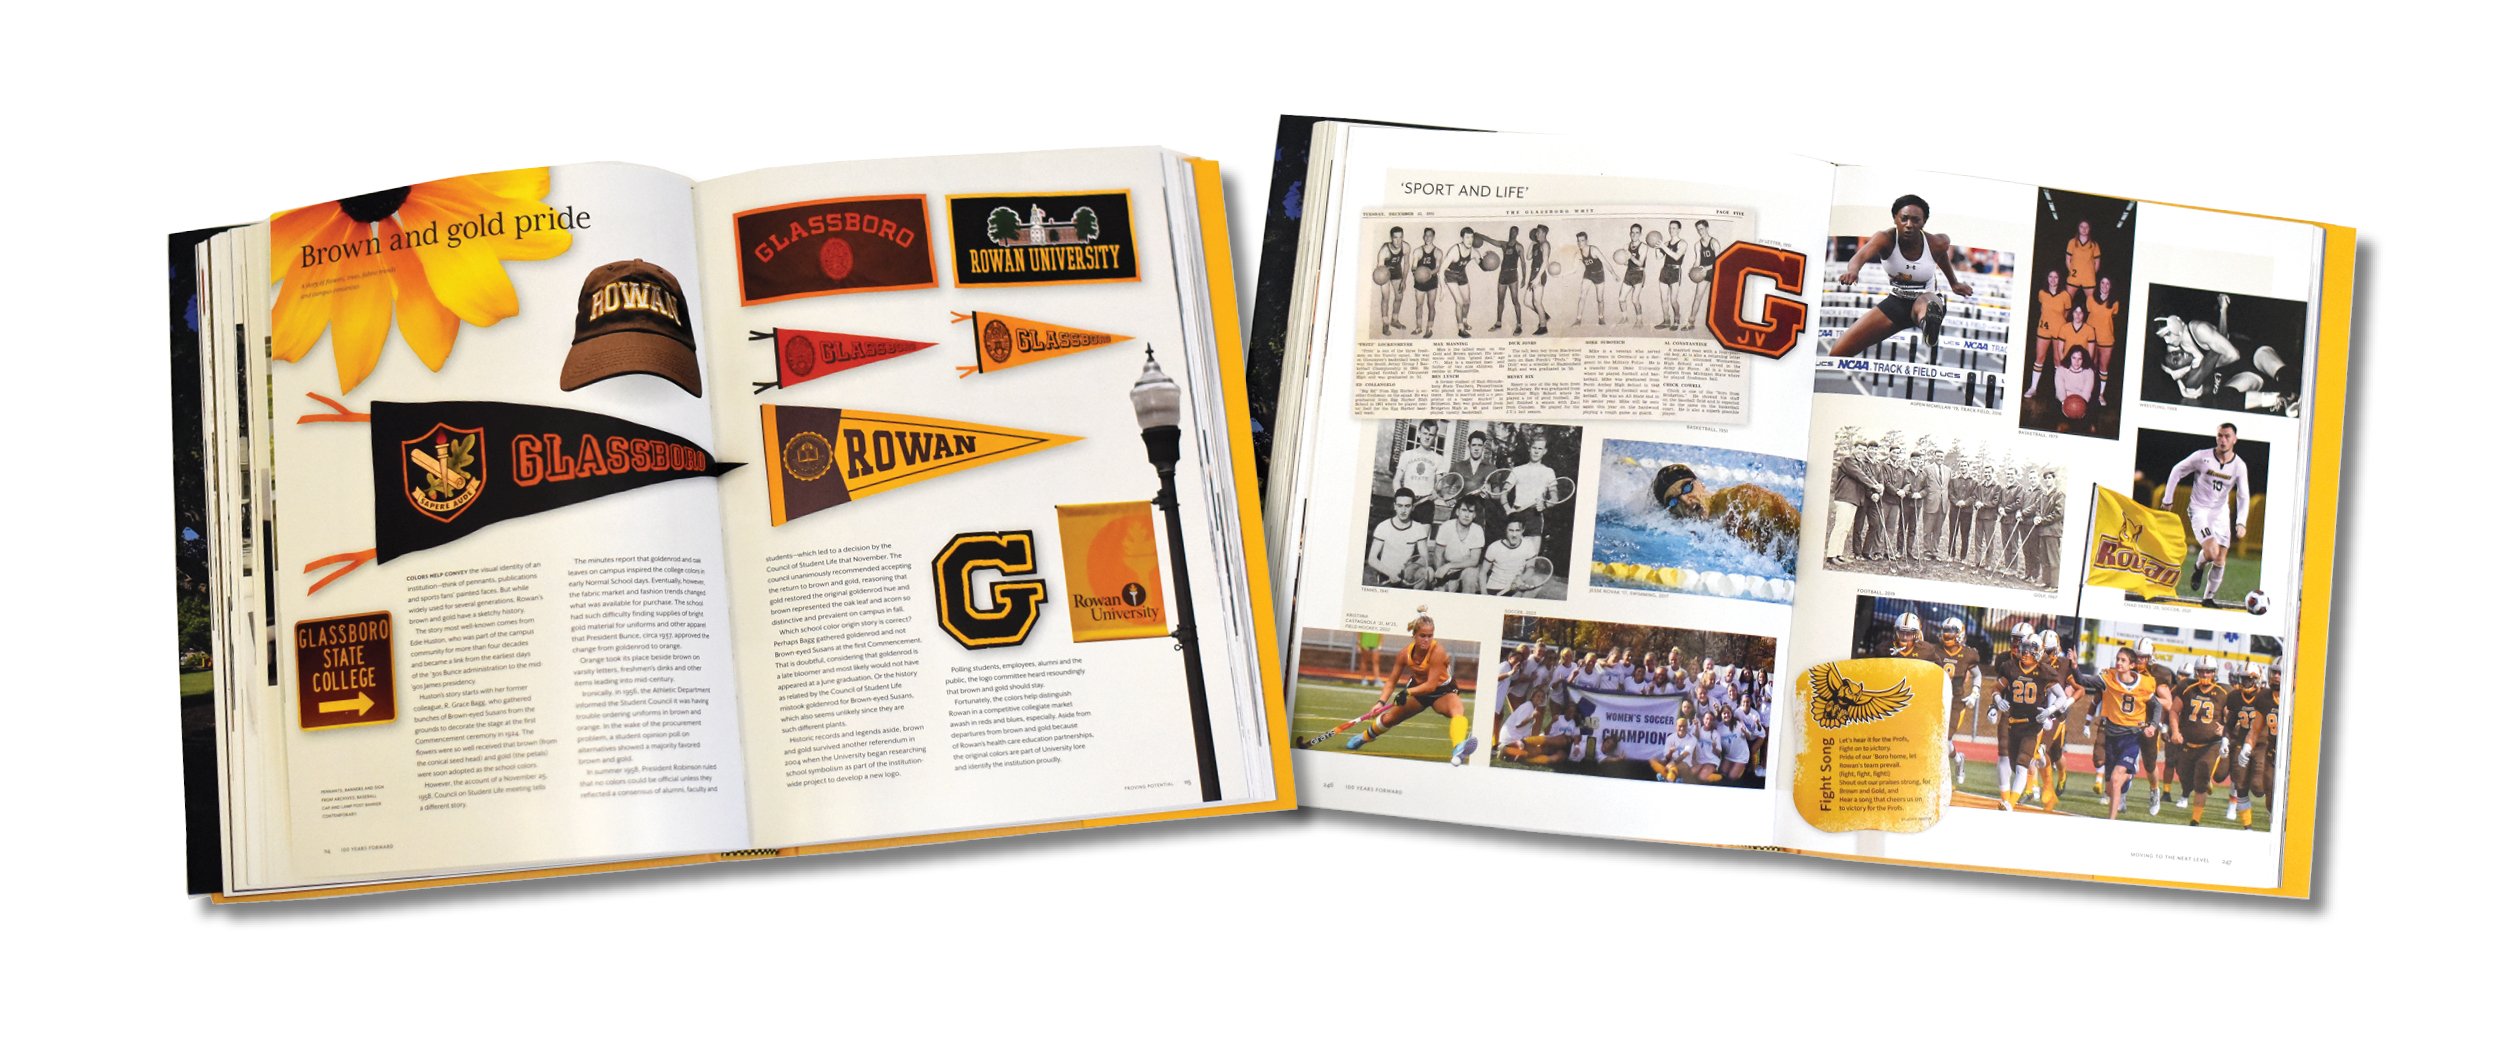 Scans of pages from "100 Years Forward: The History of Rowan University": Brown and gold pride and Athletics spreads